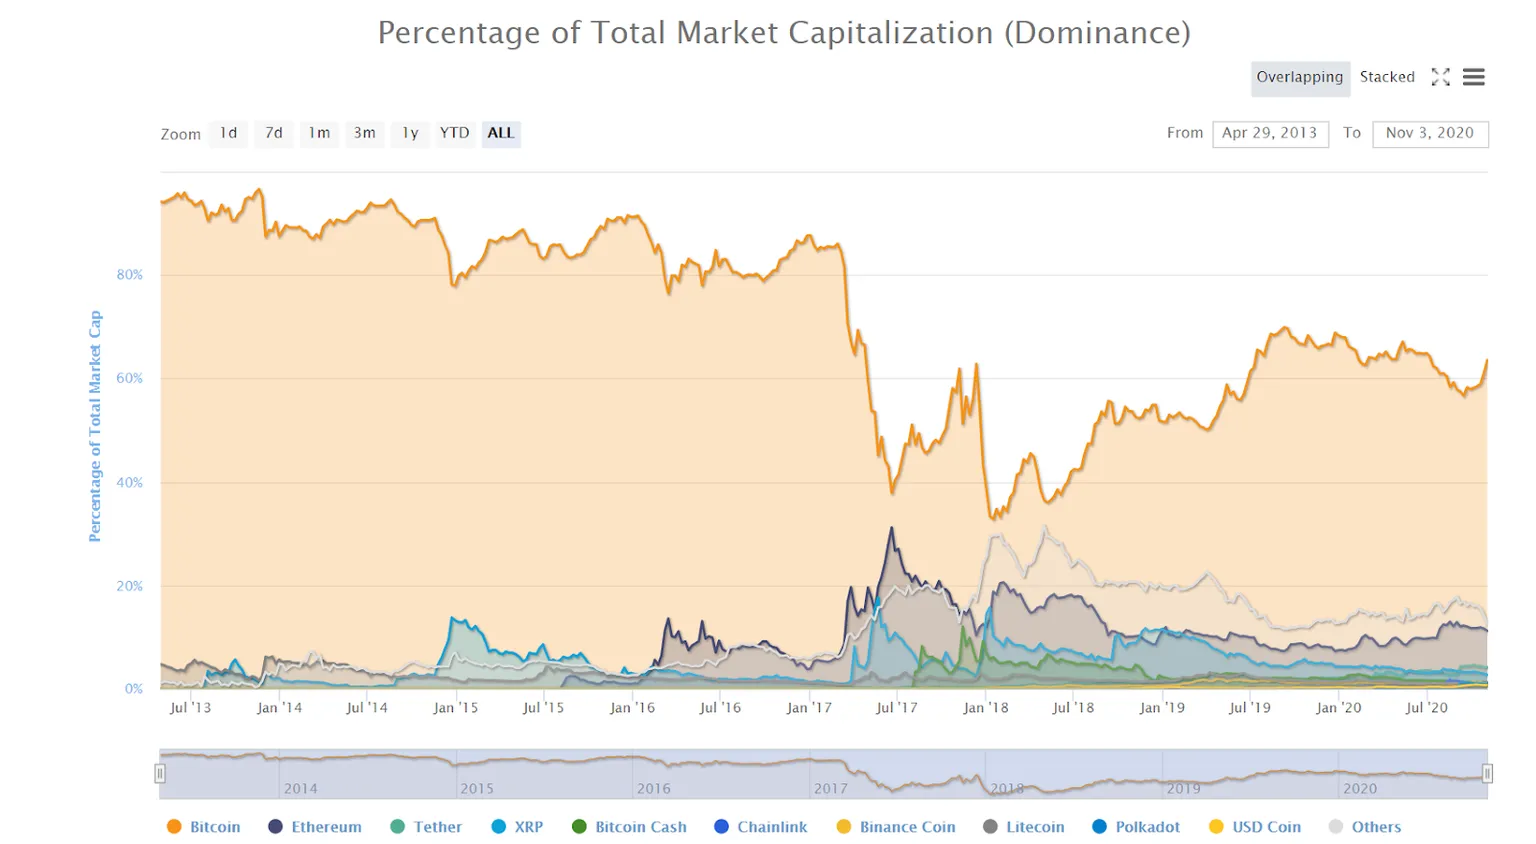 Bitcoin dominance as measured by percentage of total crypto market cap share.